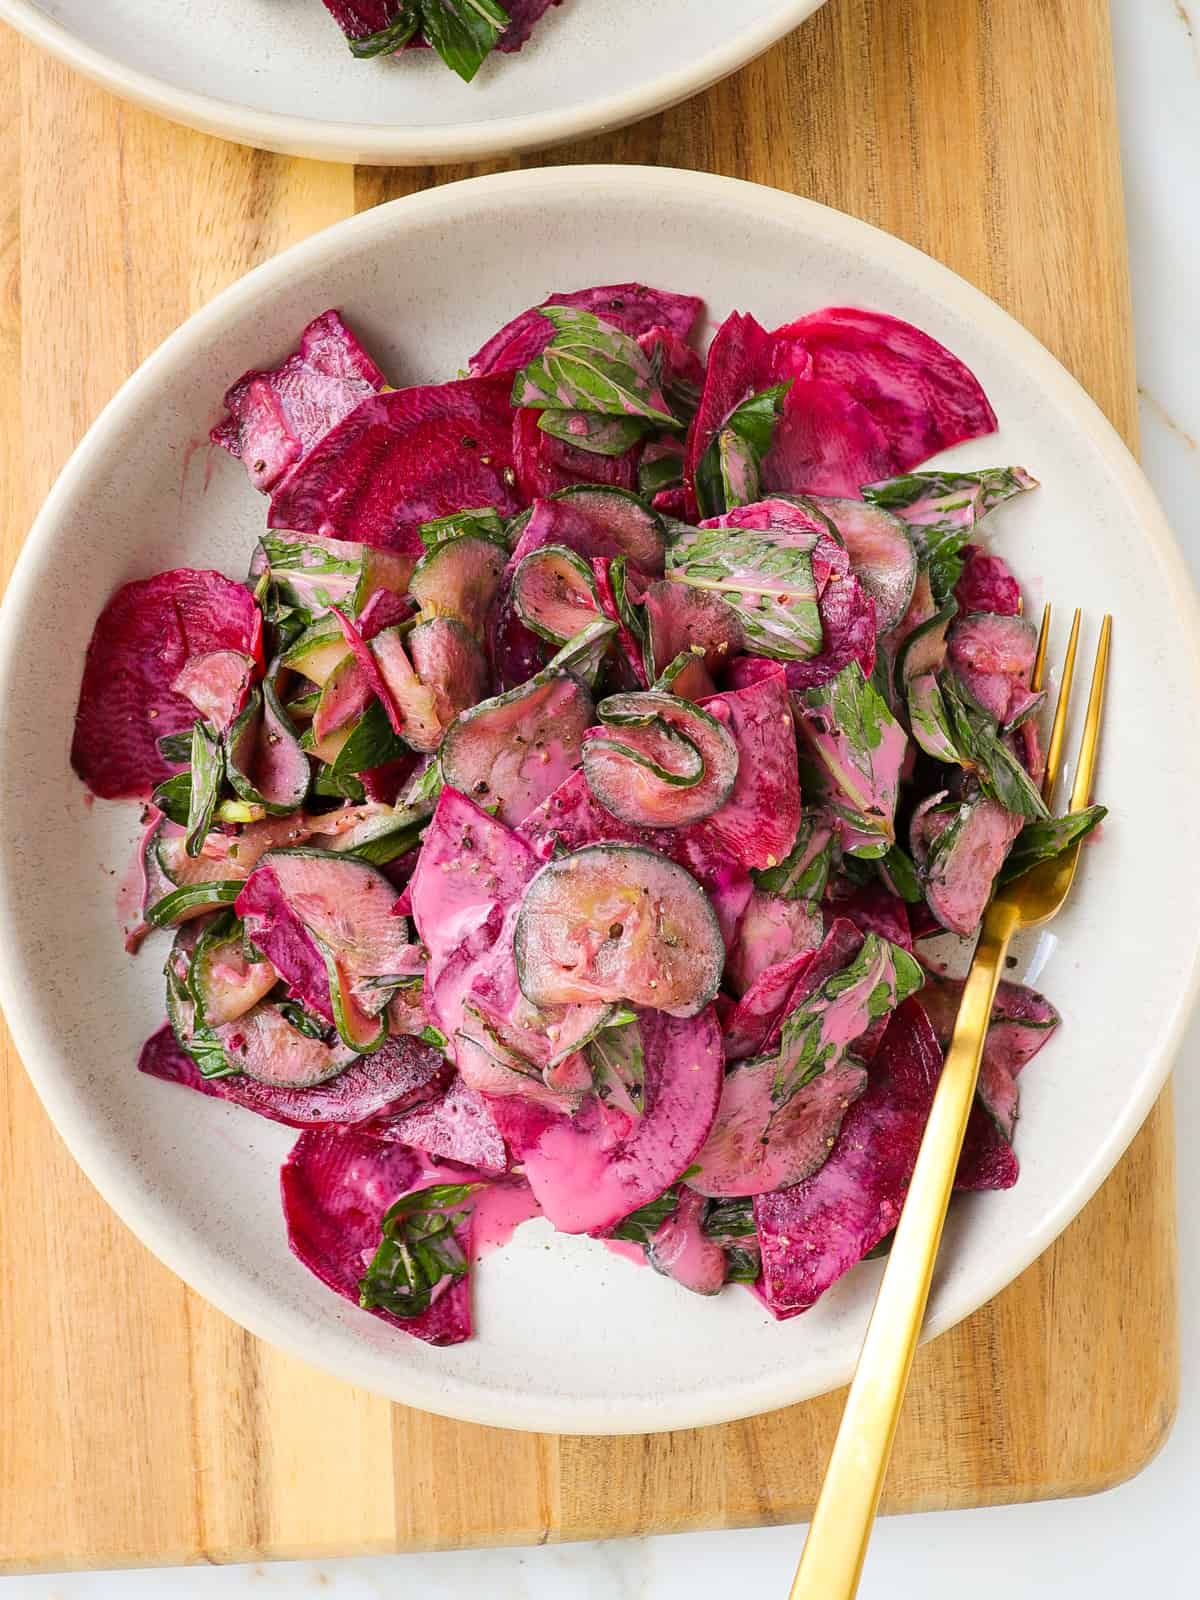 Cucumber beetroot salad in a bowl on a wooden board.